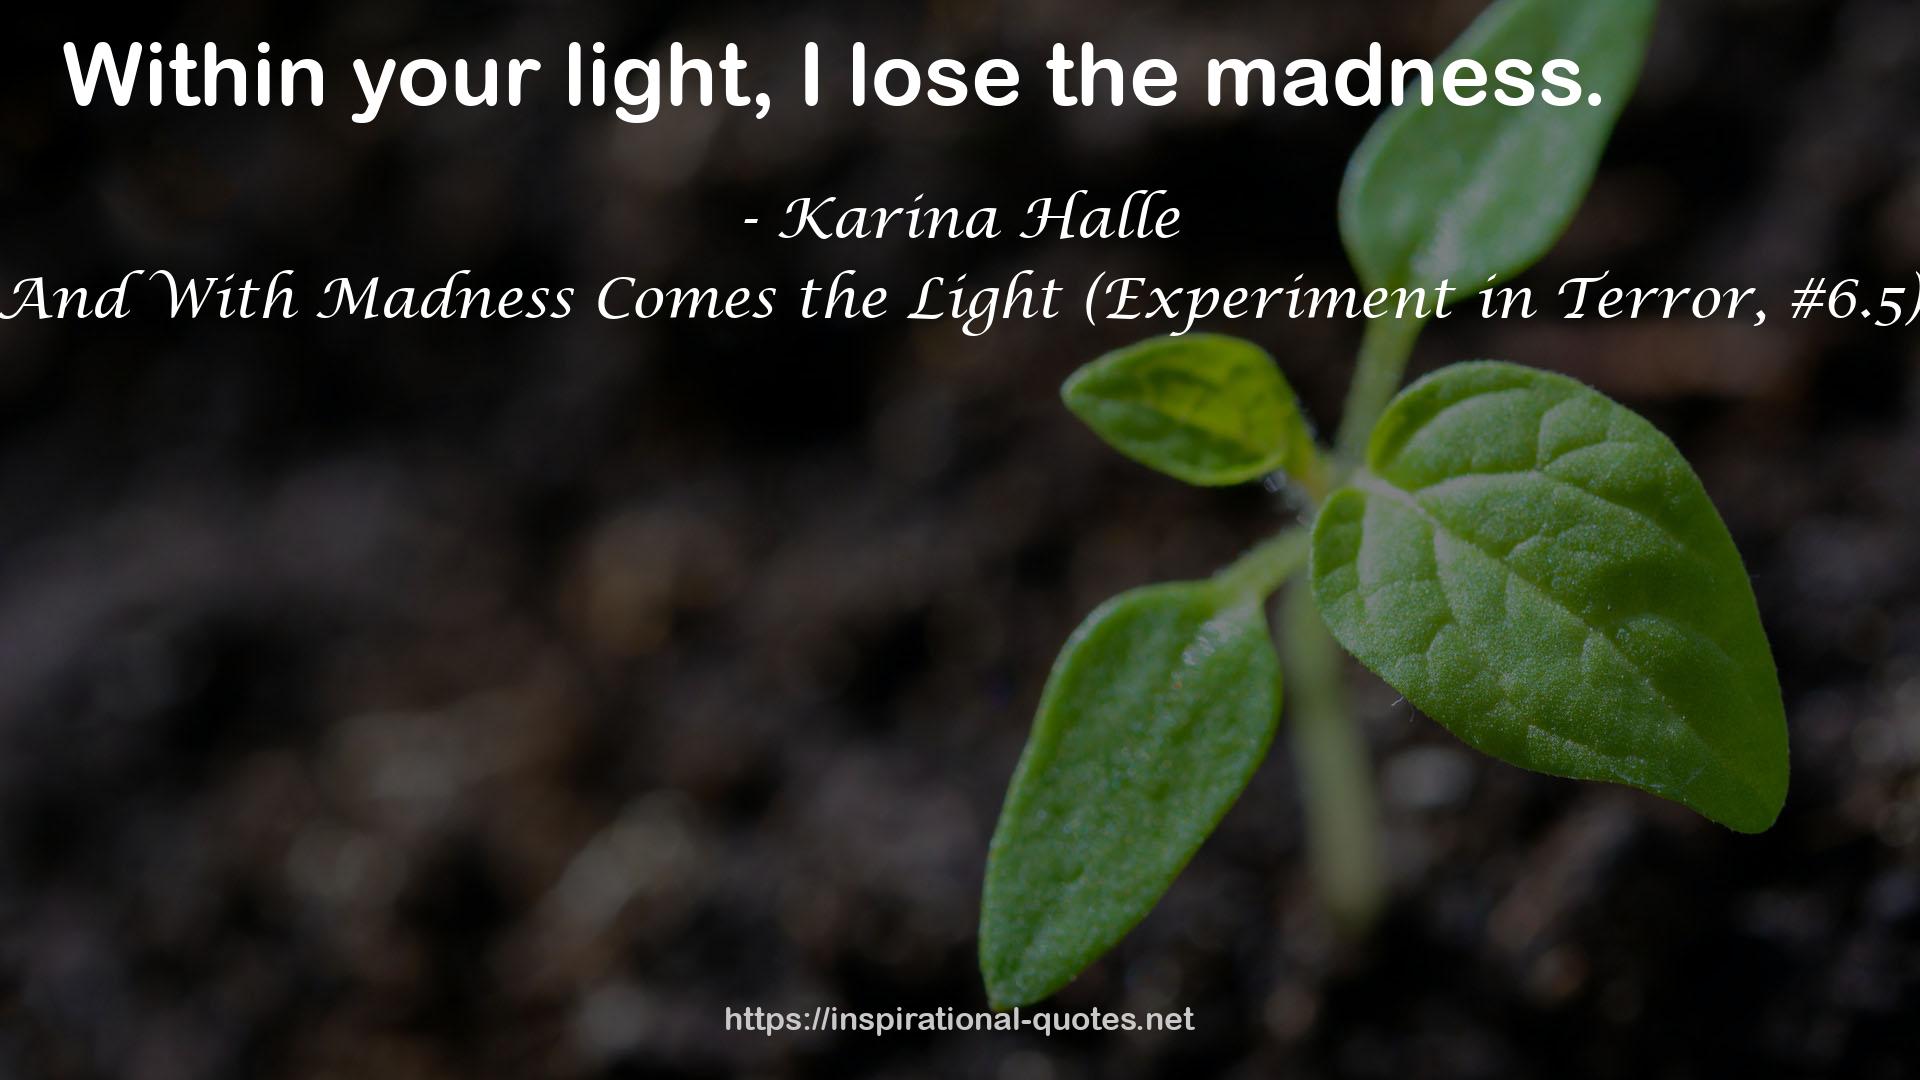 And With Madness Comes the Light (Experiment in Terror, #6.5) QUOTES